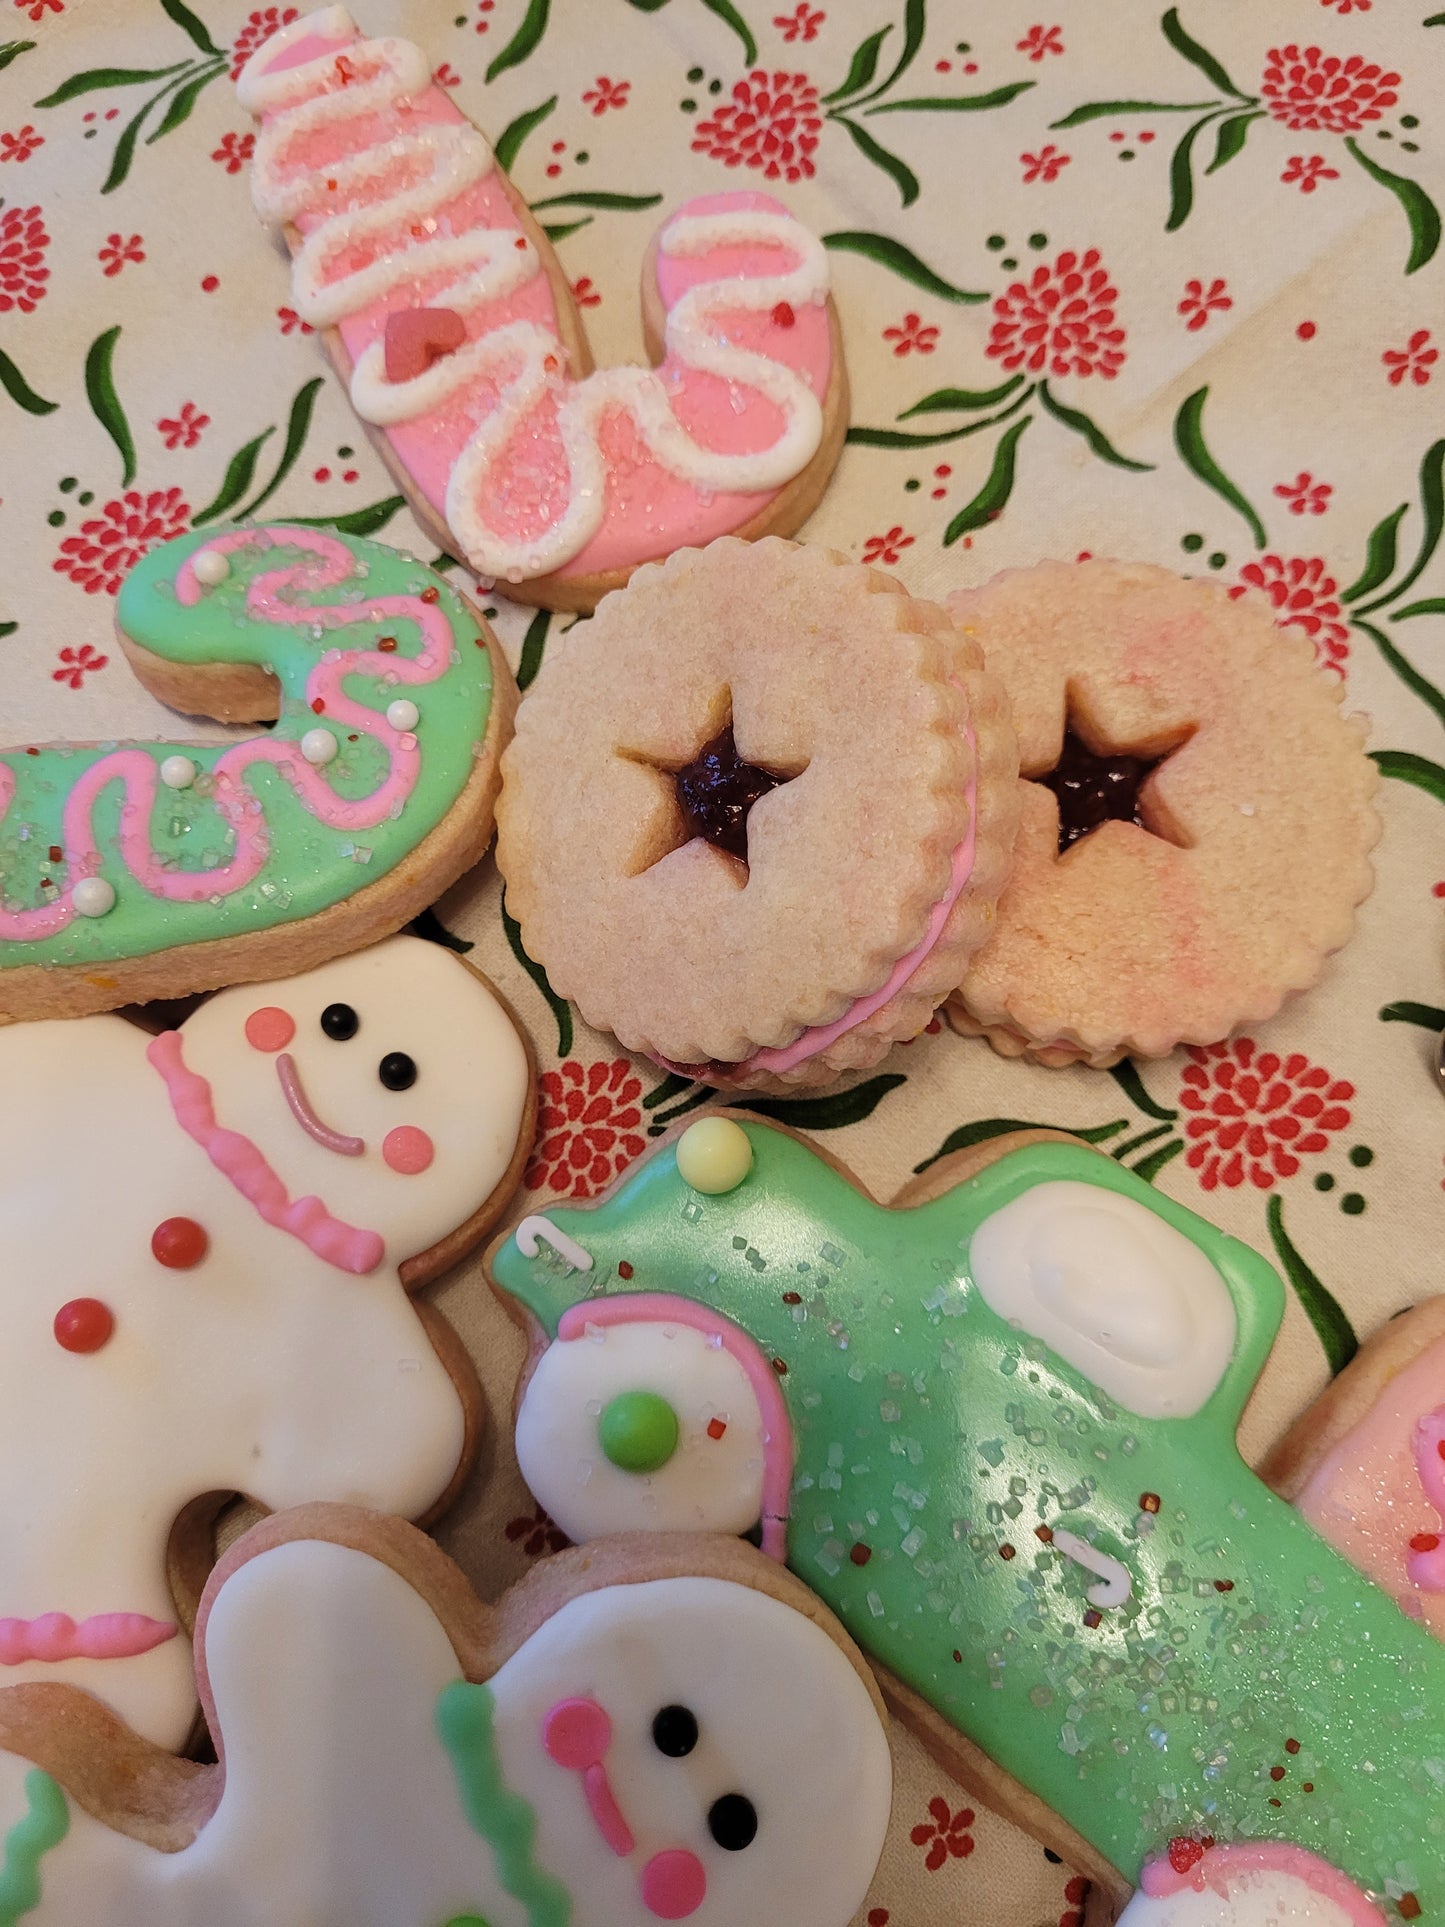 Decorated Sugar Cookies 16 count